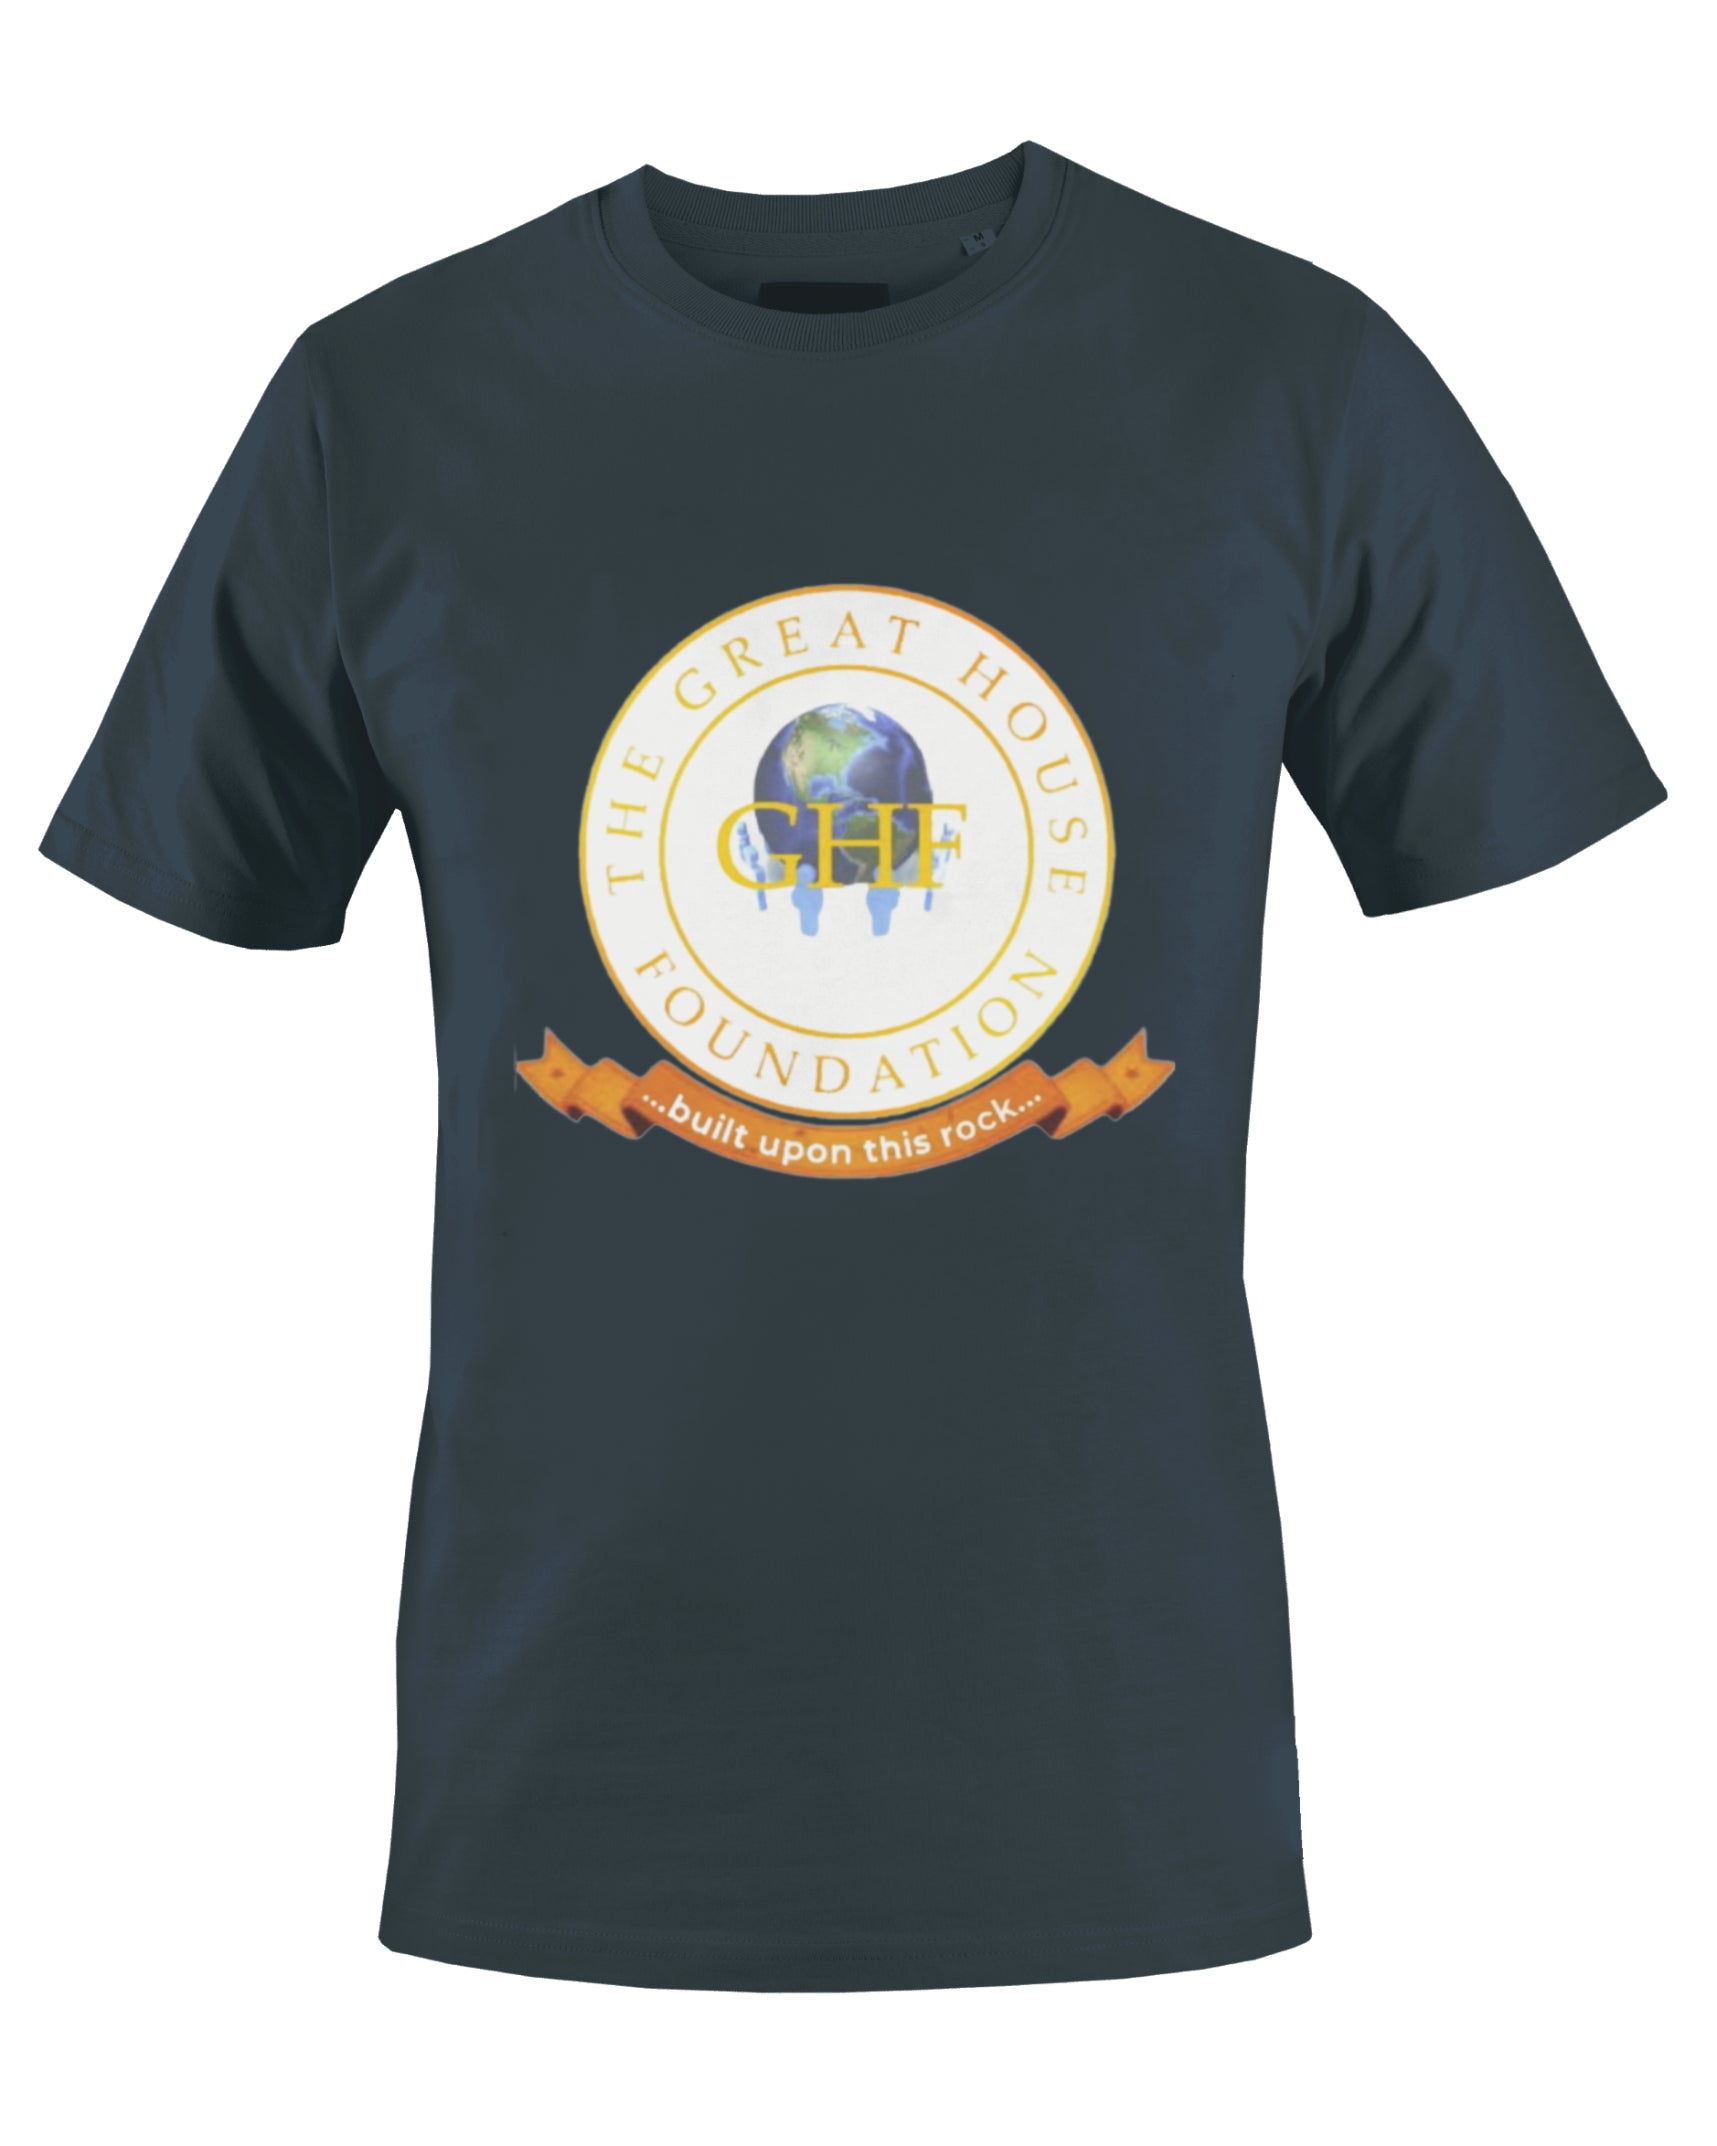 THE GREAT HOUSE FOUNDATION T-SHIRT (NAVY BLUE) - BMS MANGOES MARKETPLACE